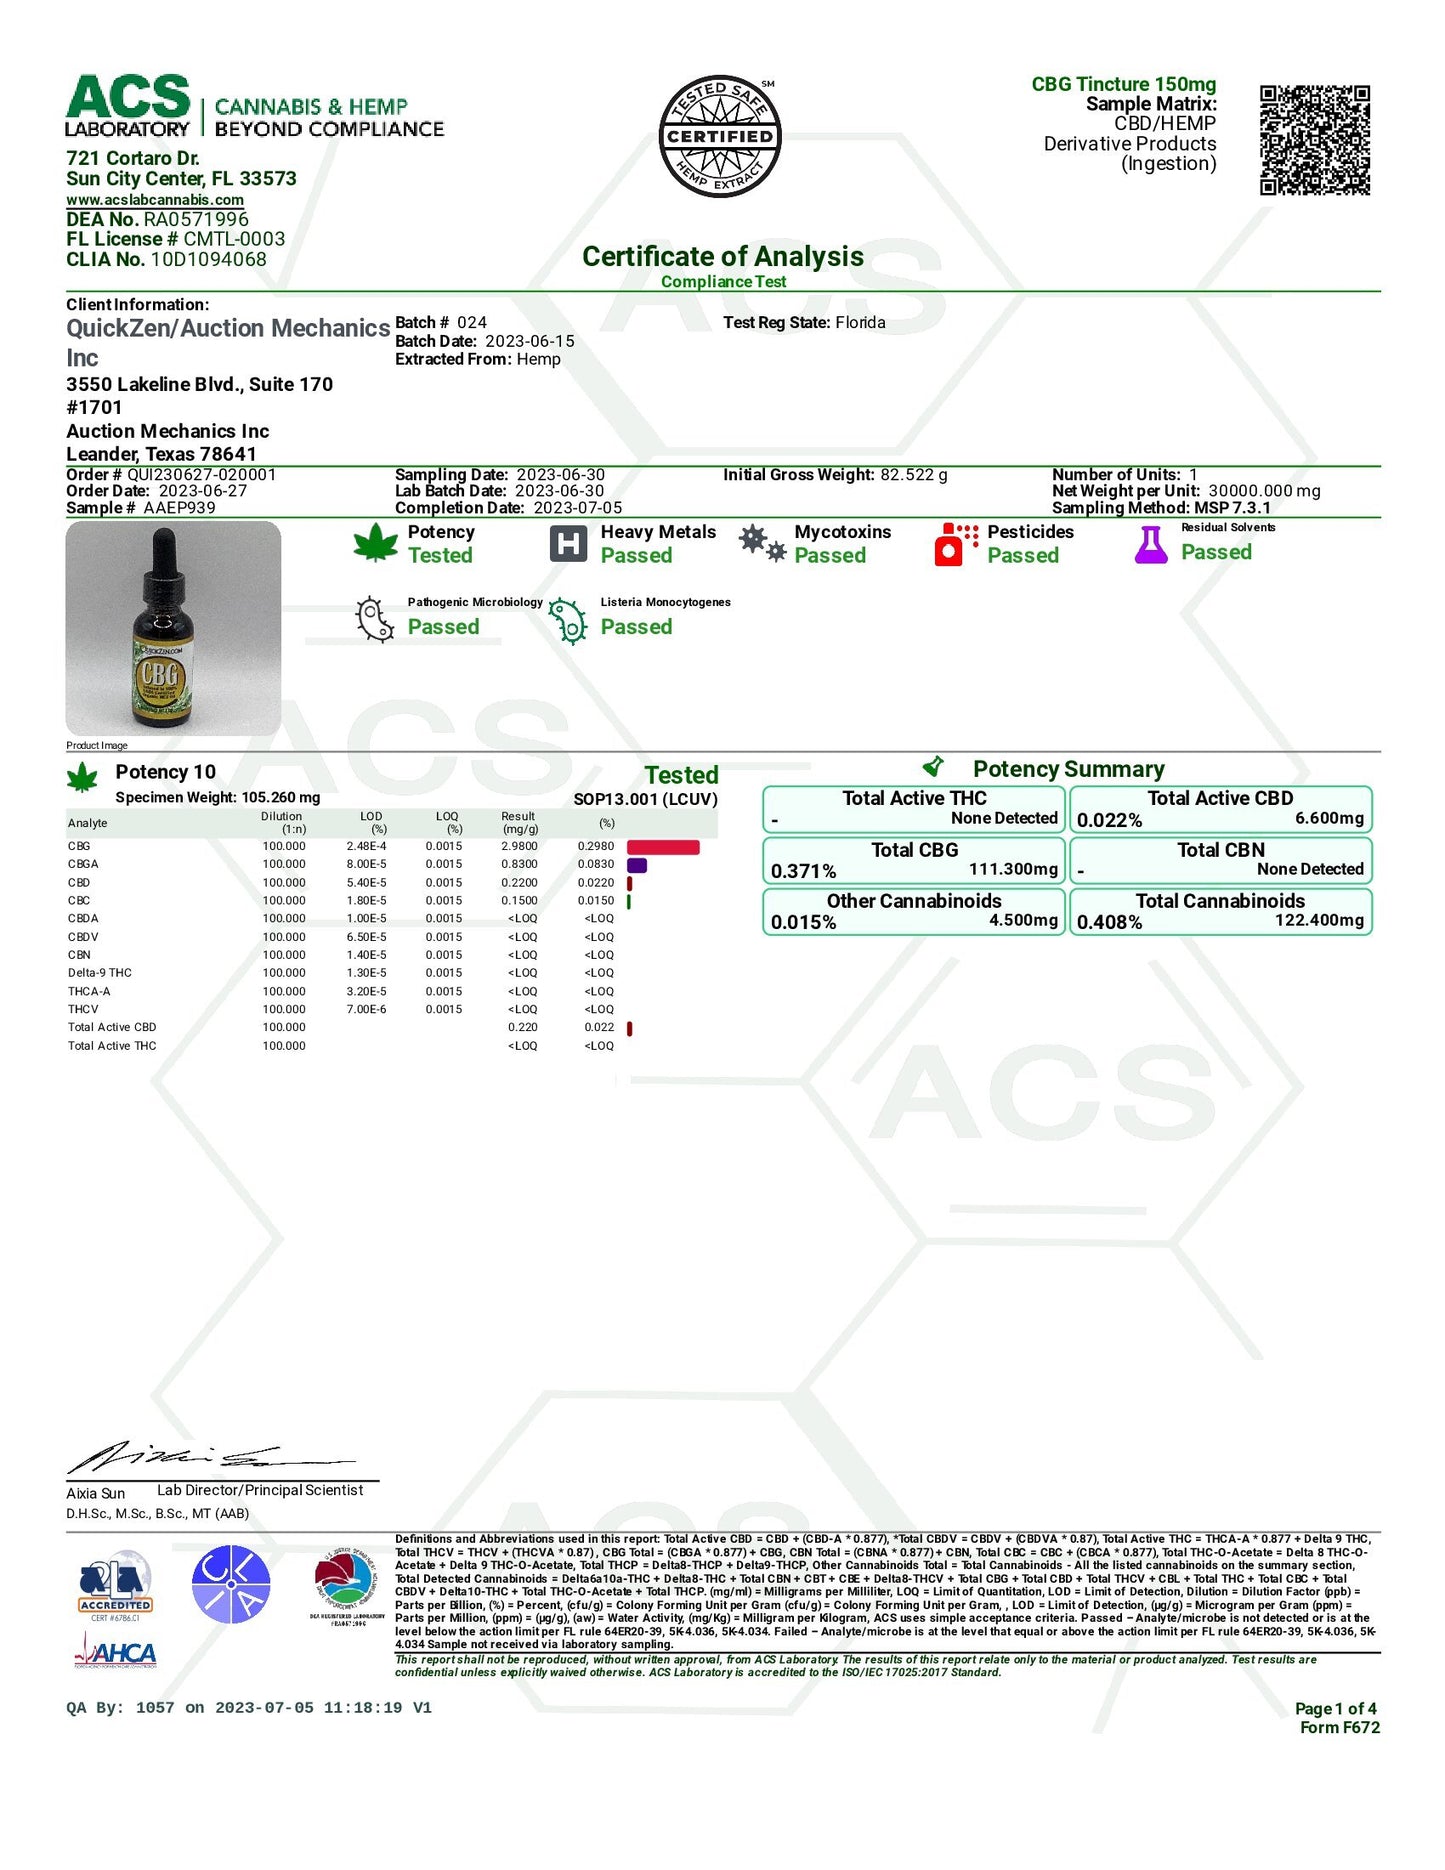 Lot 024 page one, cannabinoids profile analysis and full panel results summary. ACS Laboratories Certified Full Panel Tests.